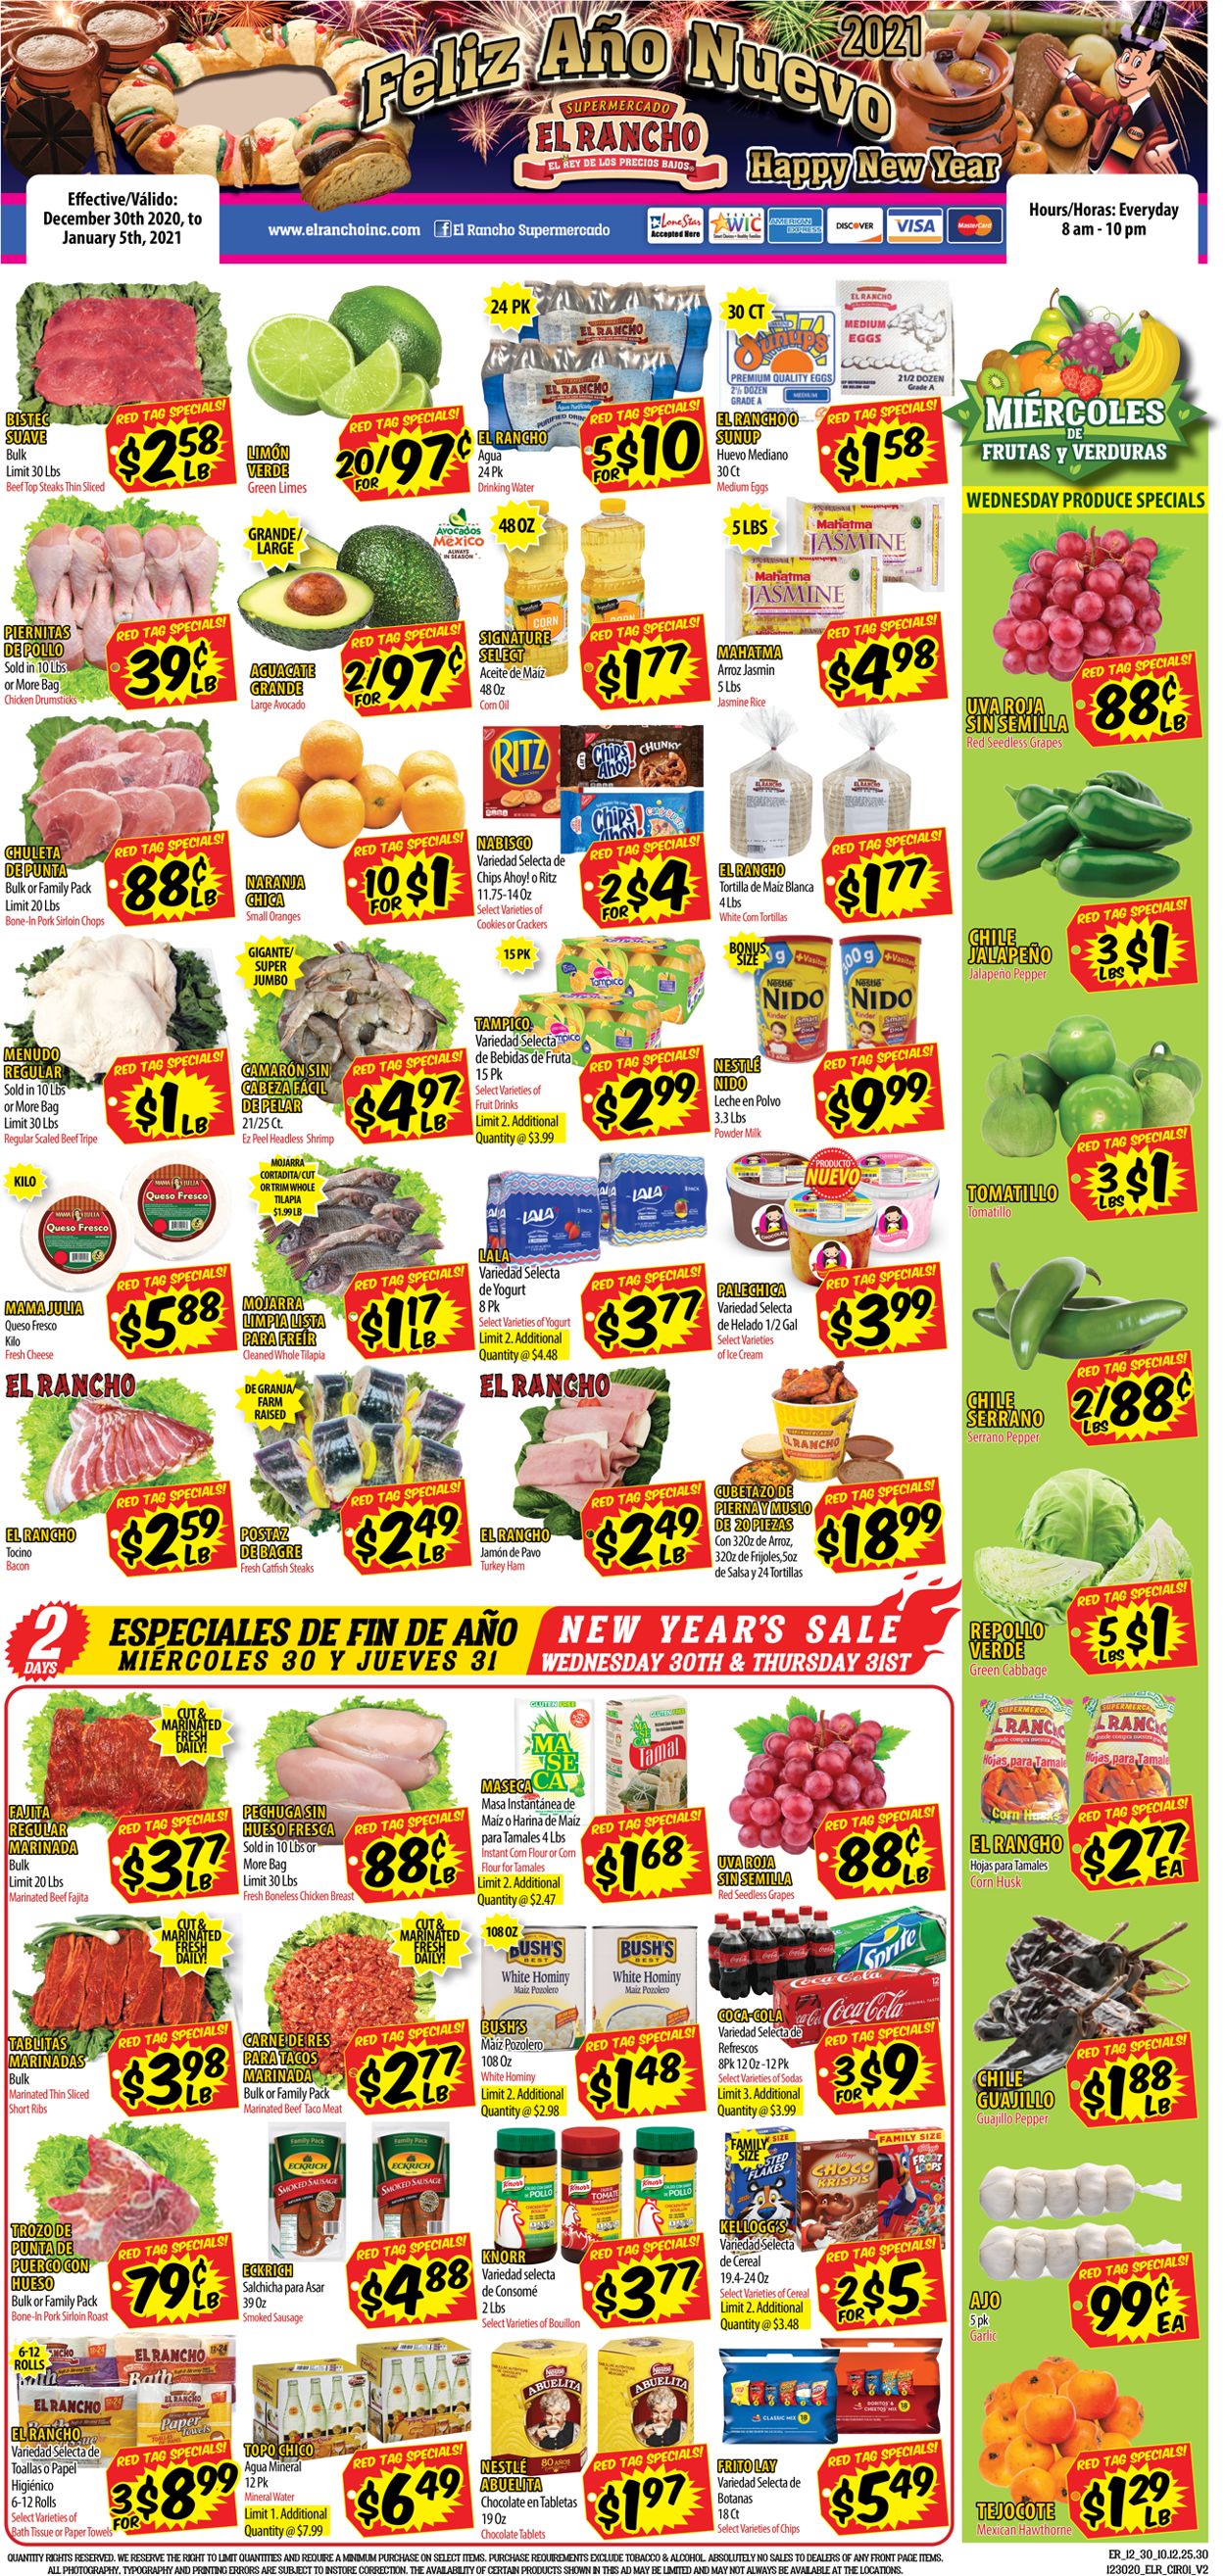 El Rancho Current weekly ad 12/30 - 01/05/2021 - frequent-ads.com